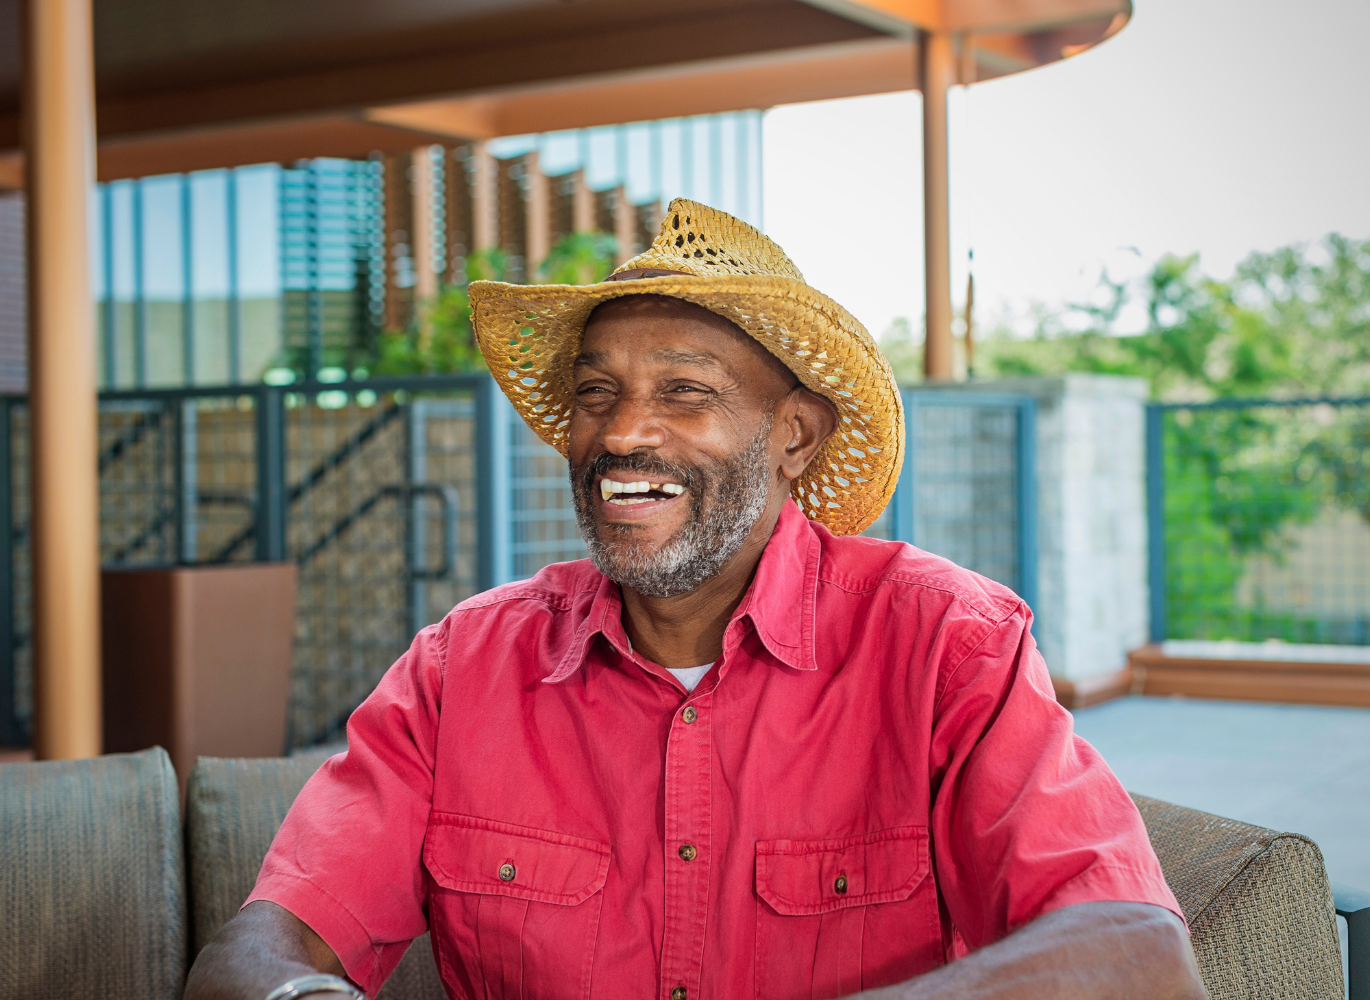 Photo of a man with a straw hat